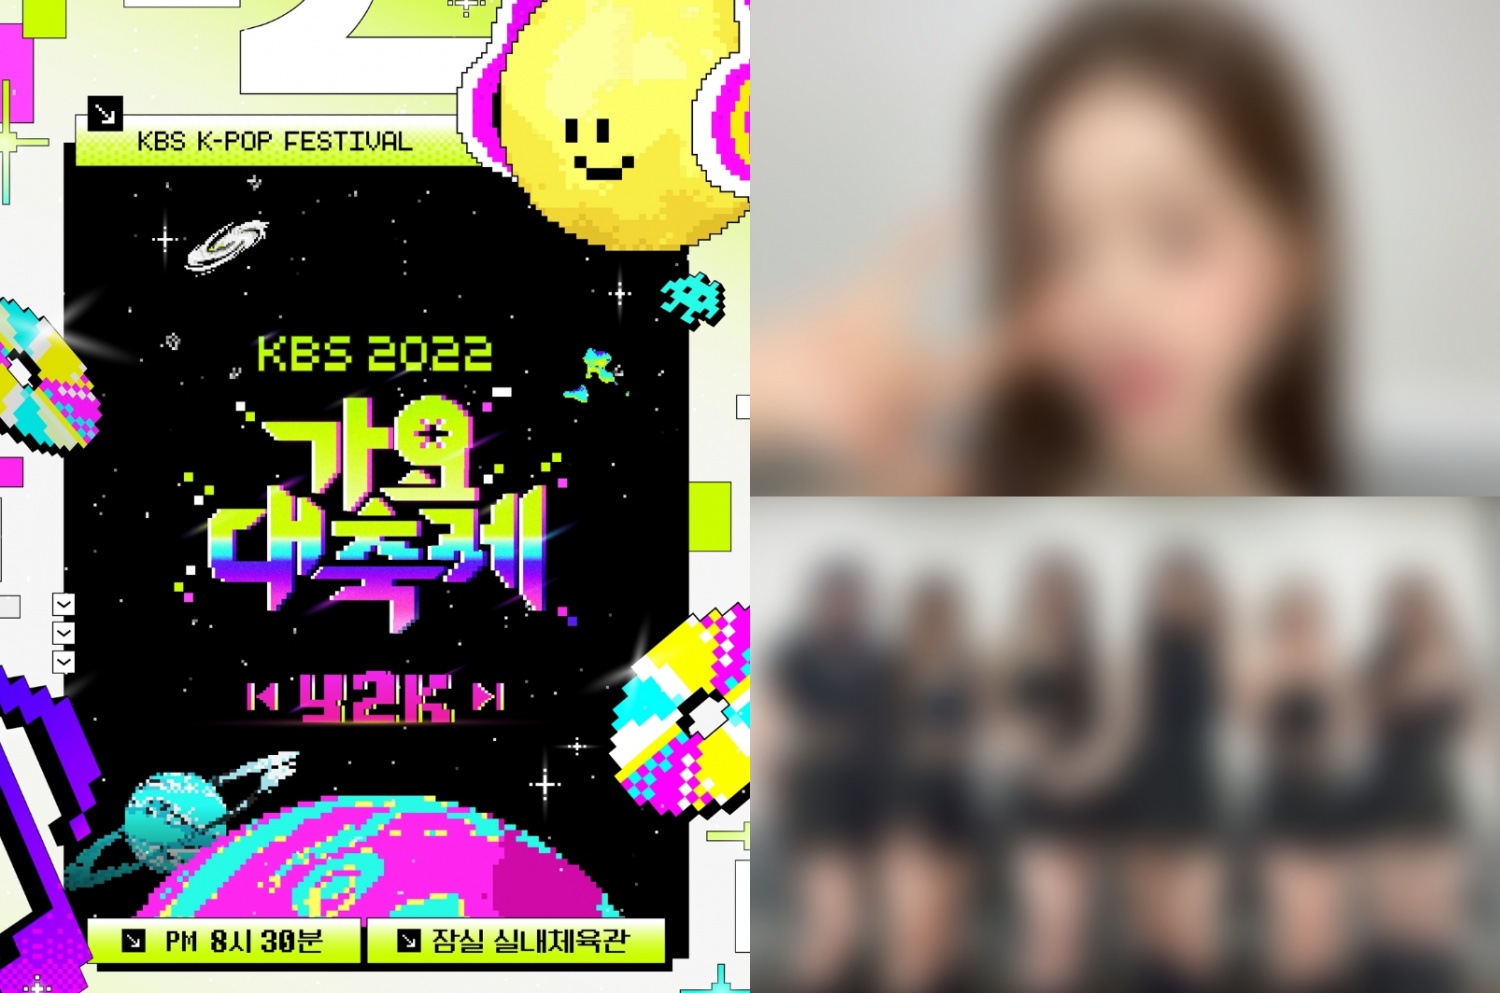 KBS Gayo Daechukje 2022 announces the hosts and lineup of performers